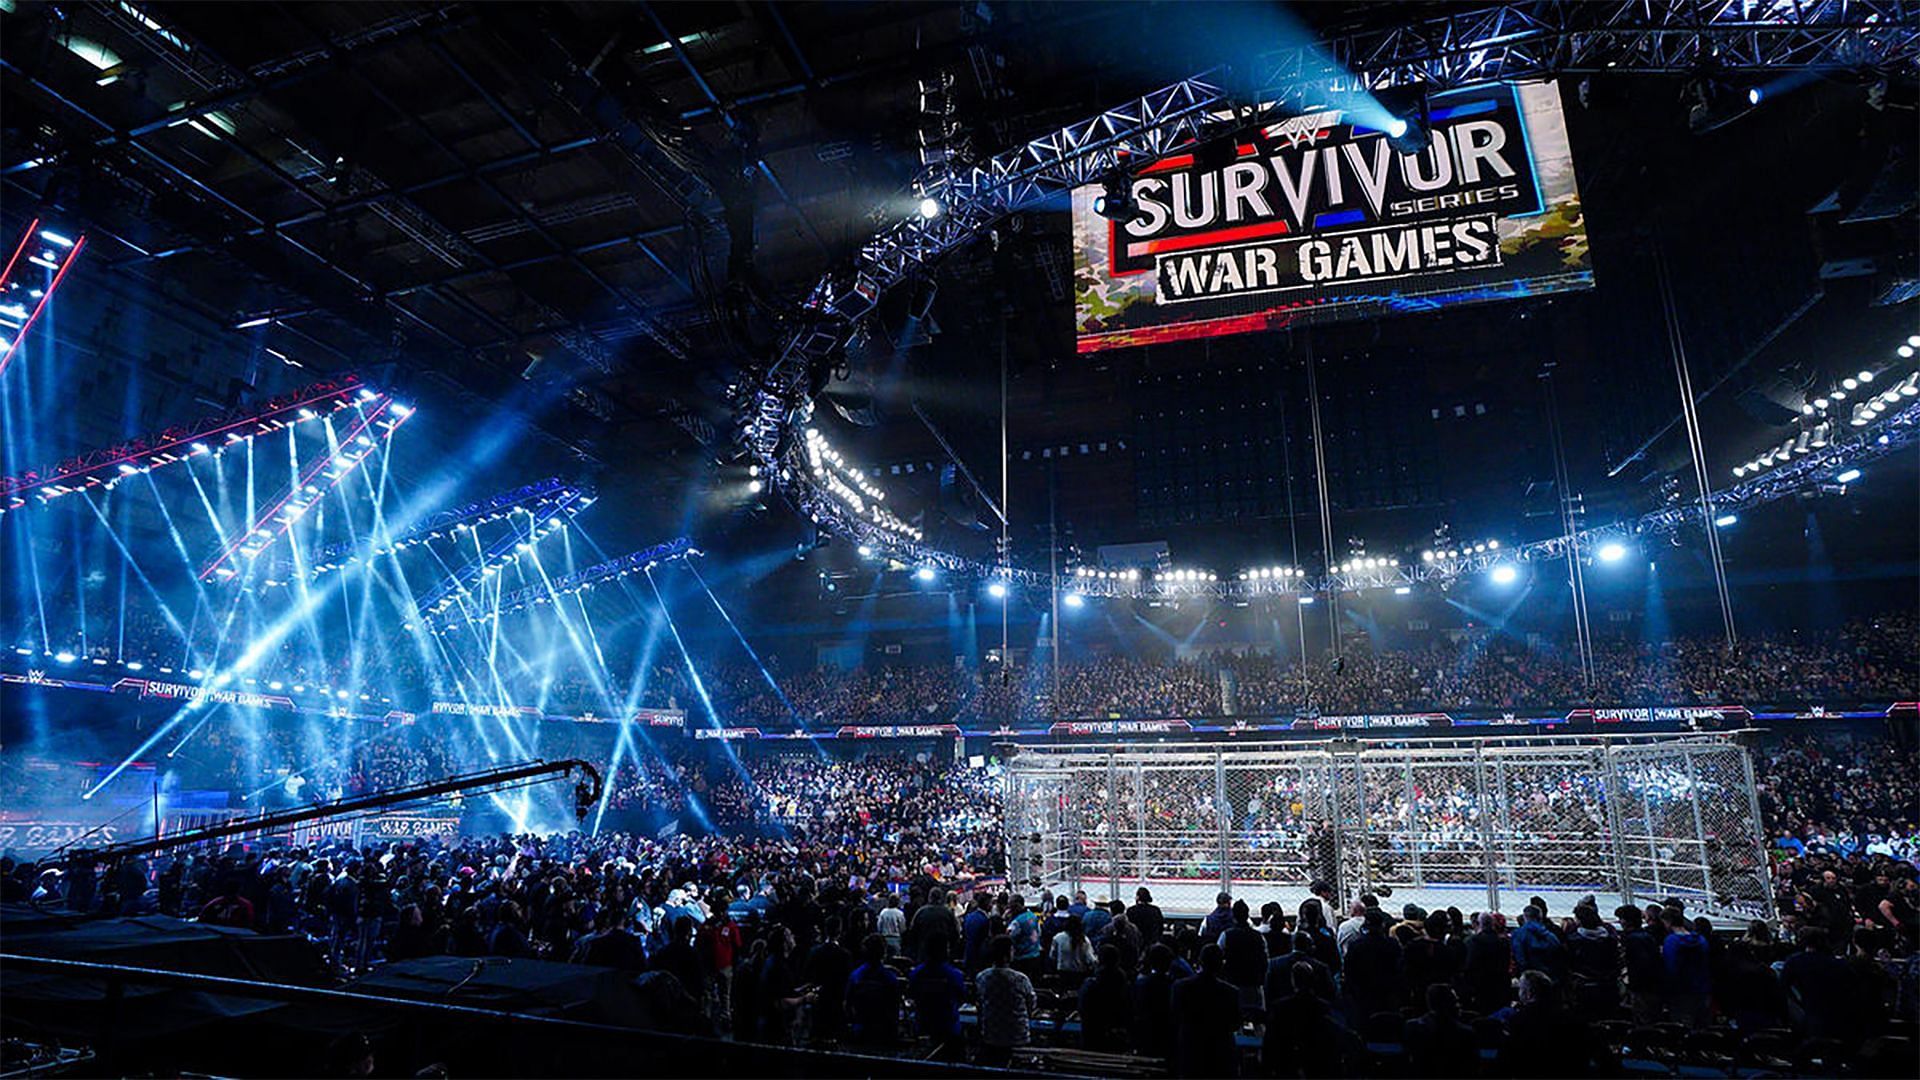 The WWE Survivor Series WarGames ring and set at the Allstate Arena